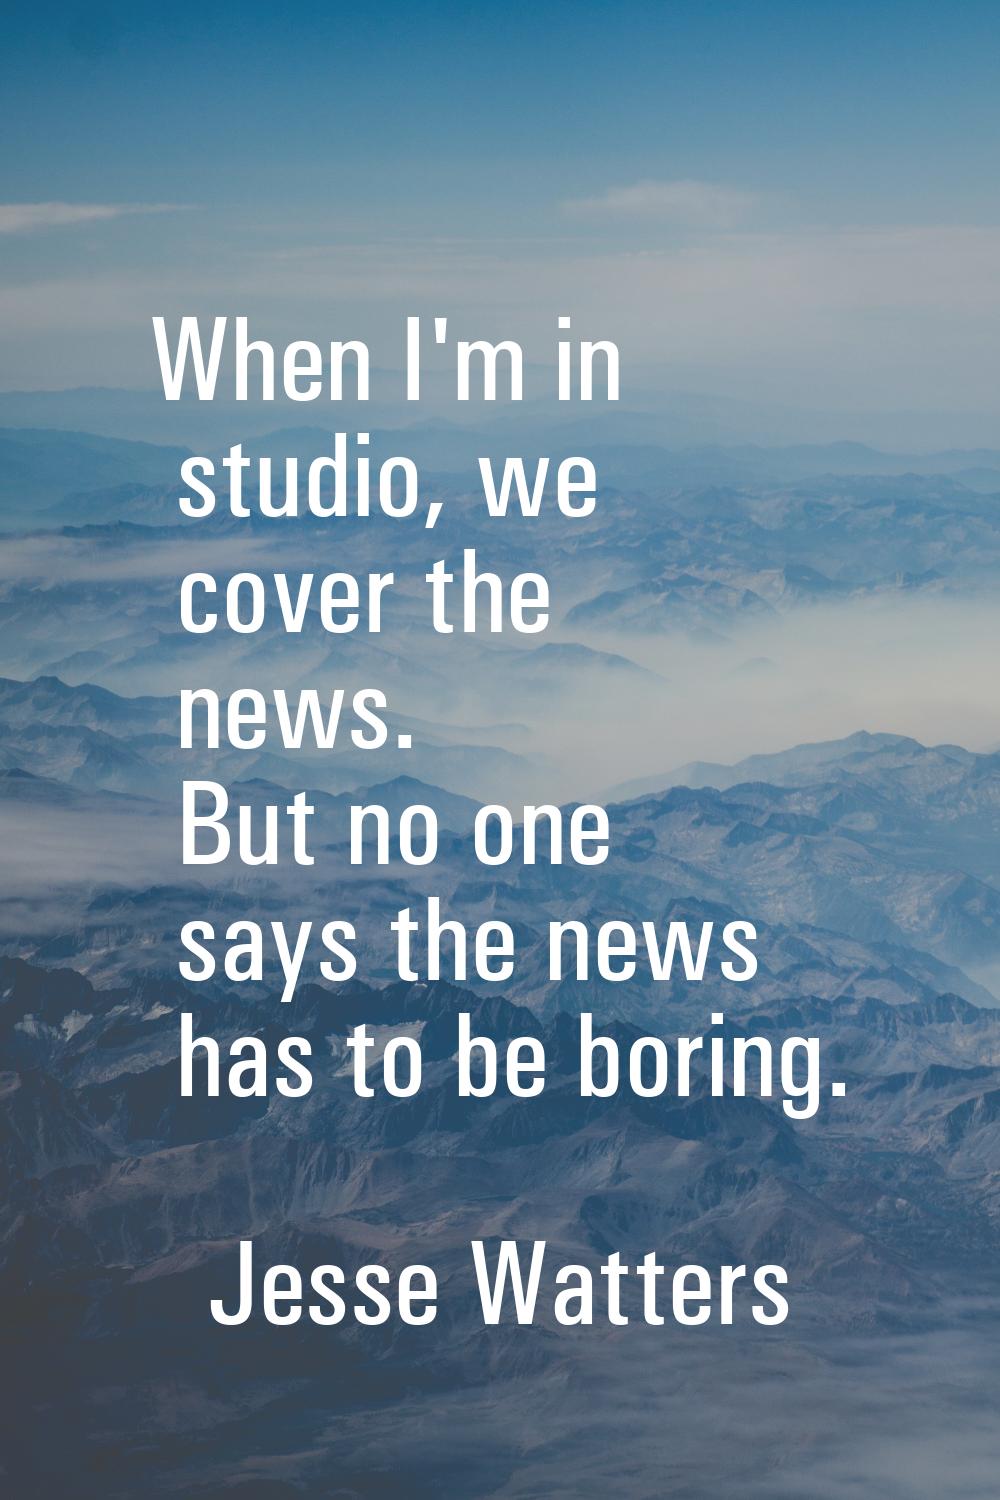 When I'm in studio, we cover the news. But no one says the news has to be boring.